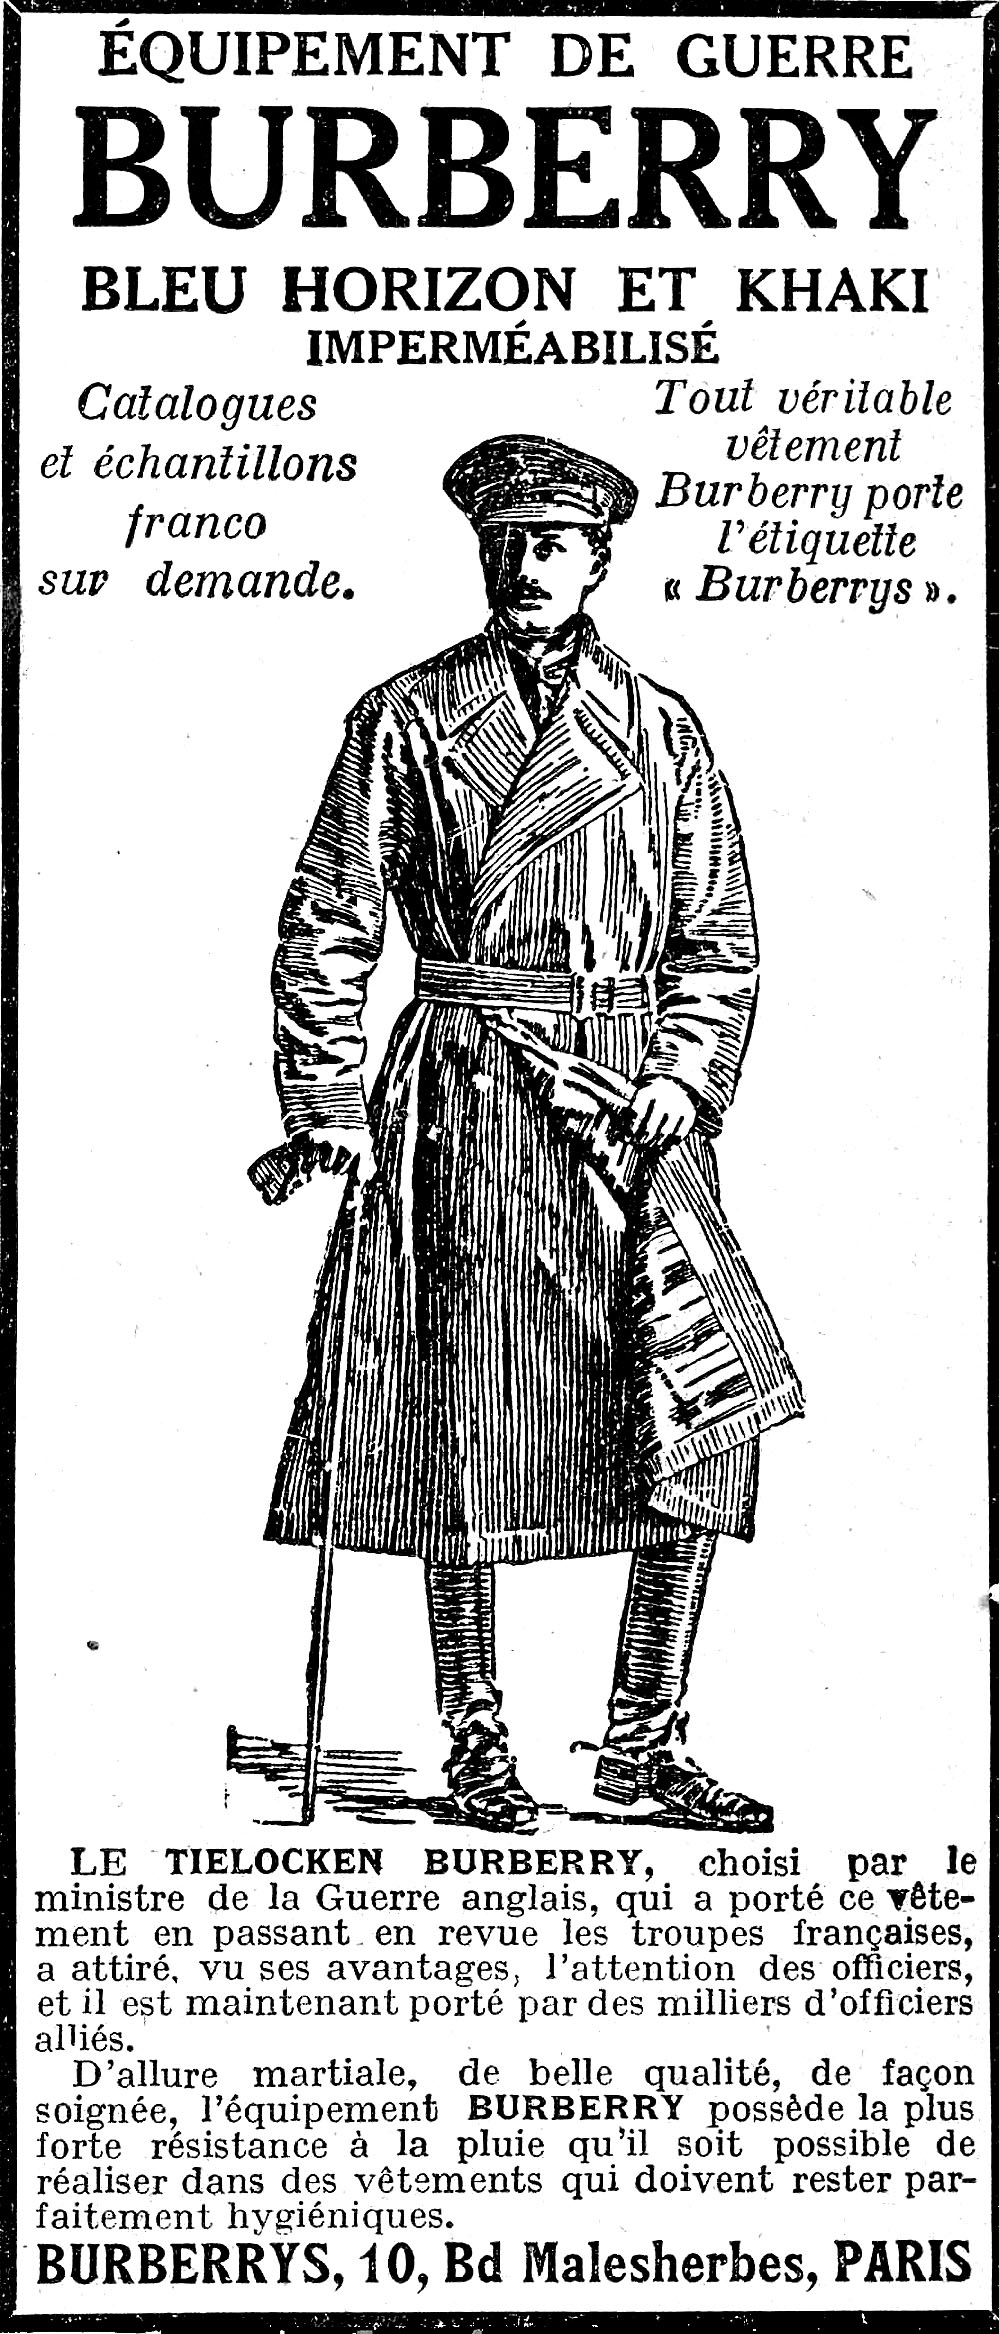 The Famous One: The Burberry Trench Coat  (The Stars and Stripes, 1918)